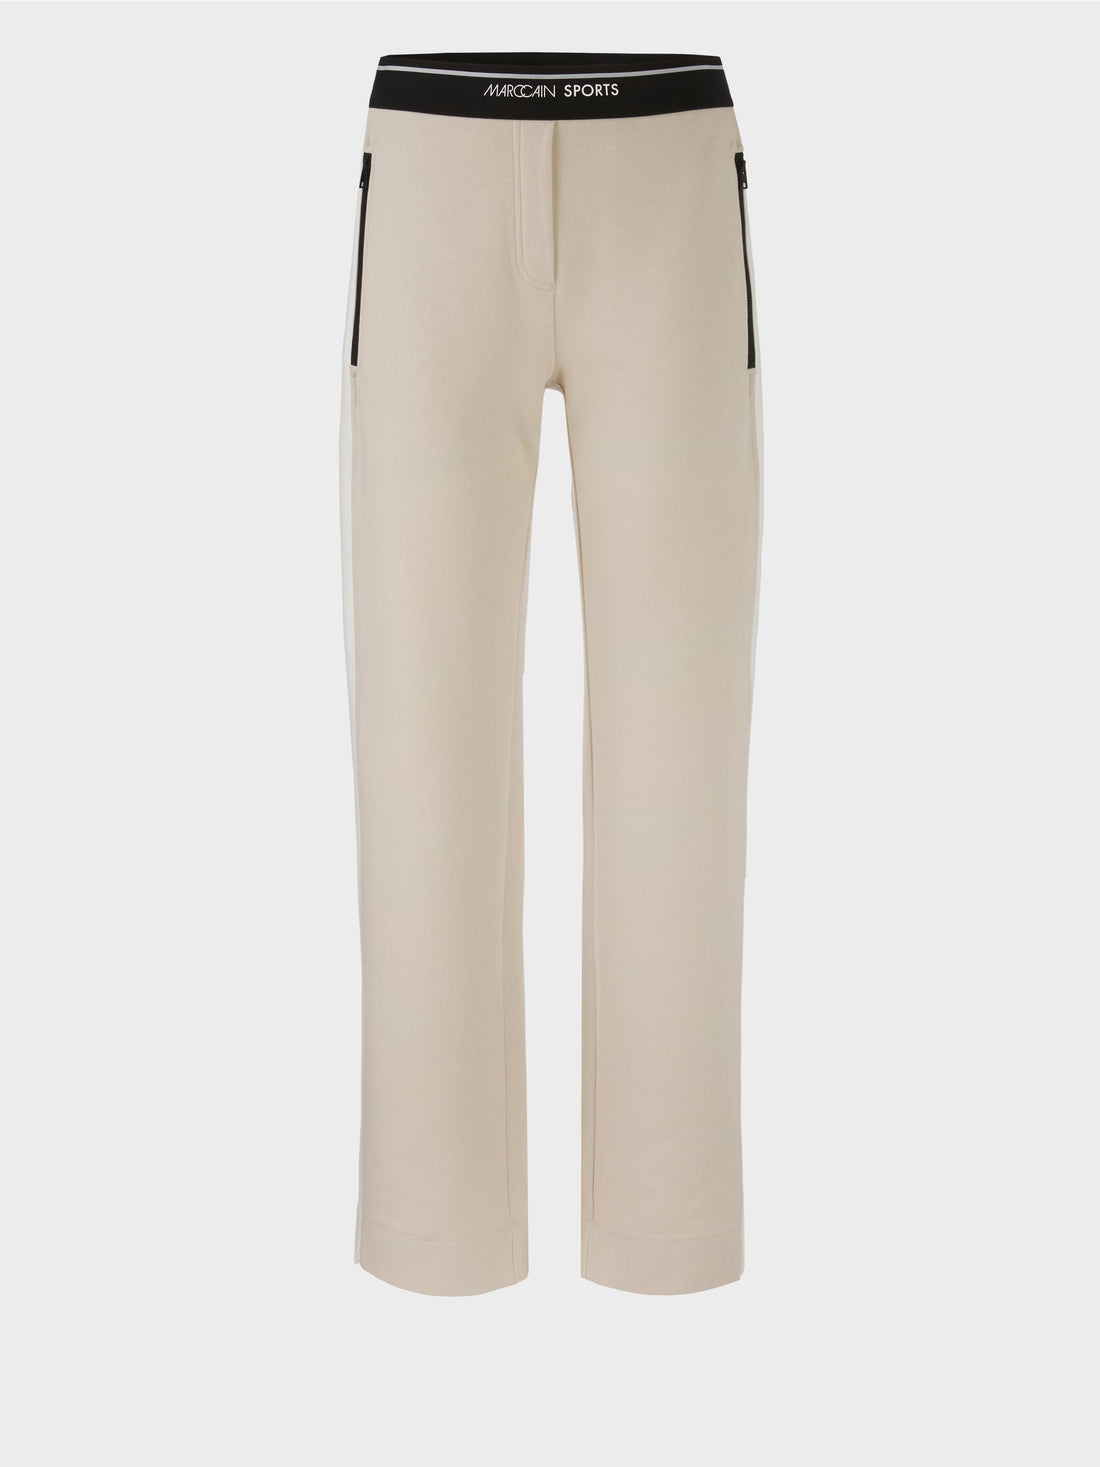 Wels Pants - With Gallon_WS 81.12 J09_117_01